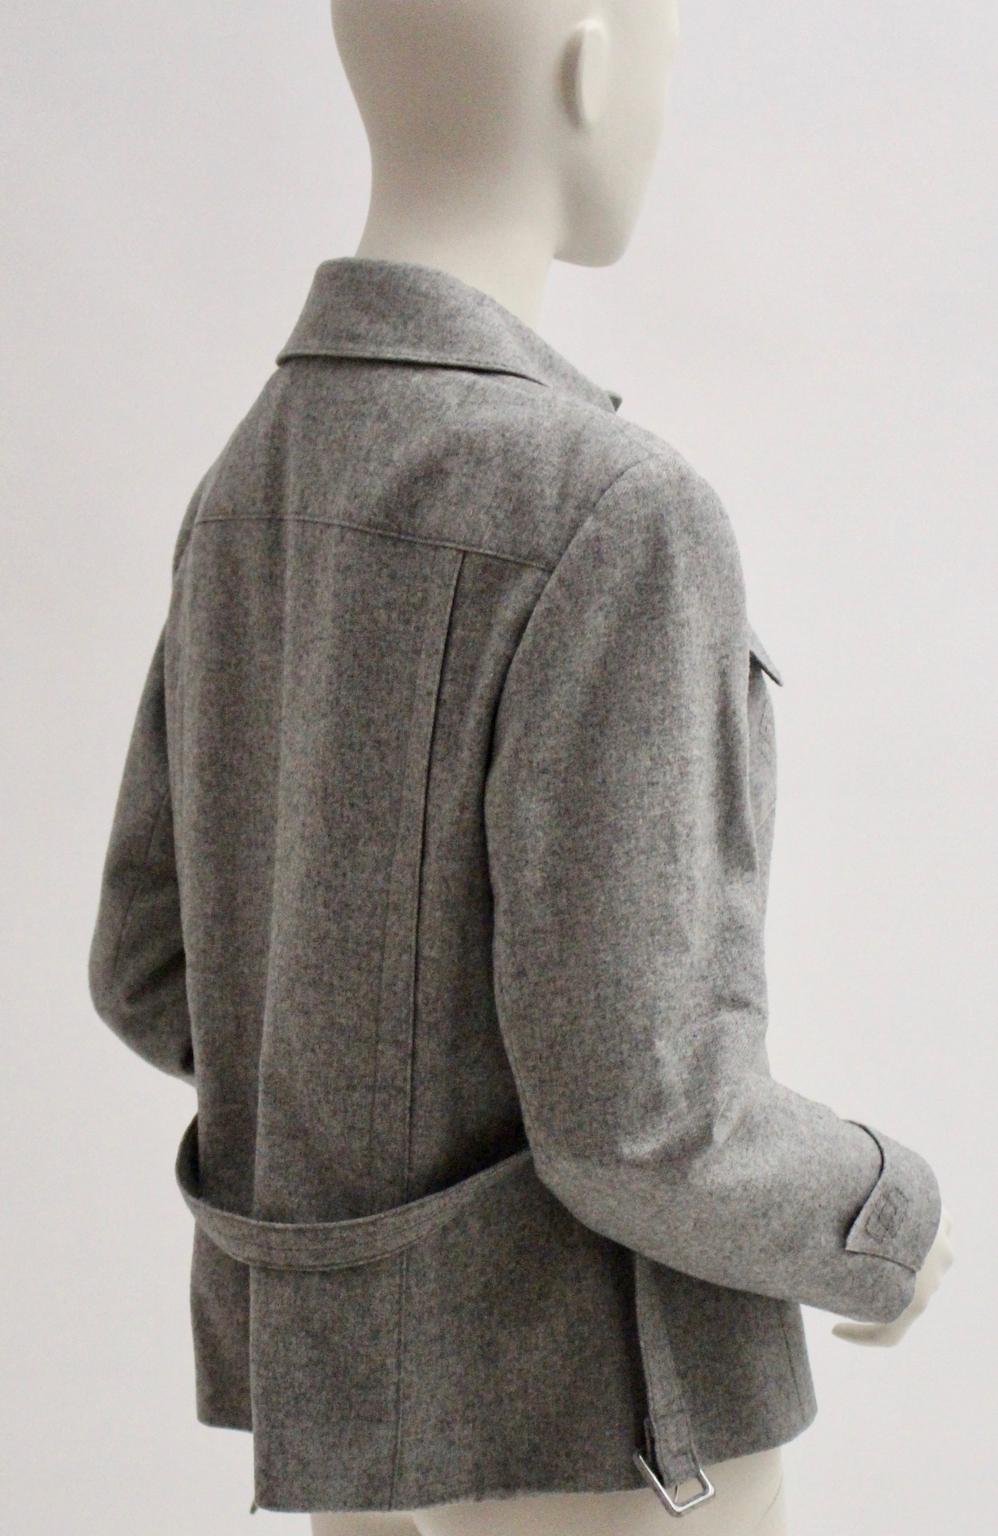 Gray Grey Single-Breasted Wool Vintage Jacket by Herbert Schill 1960s Vienna For Sale